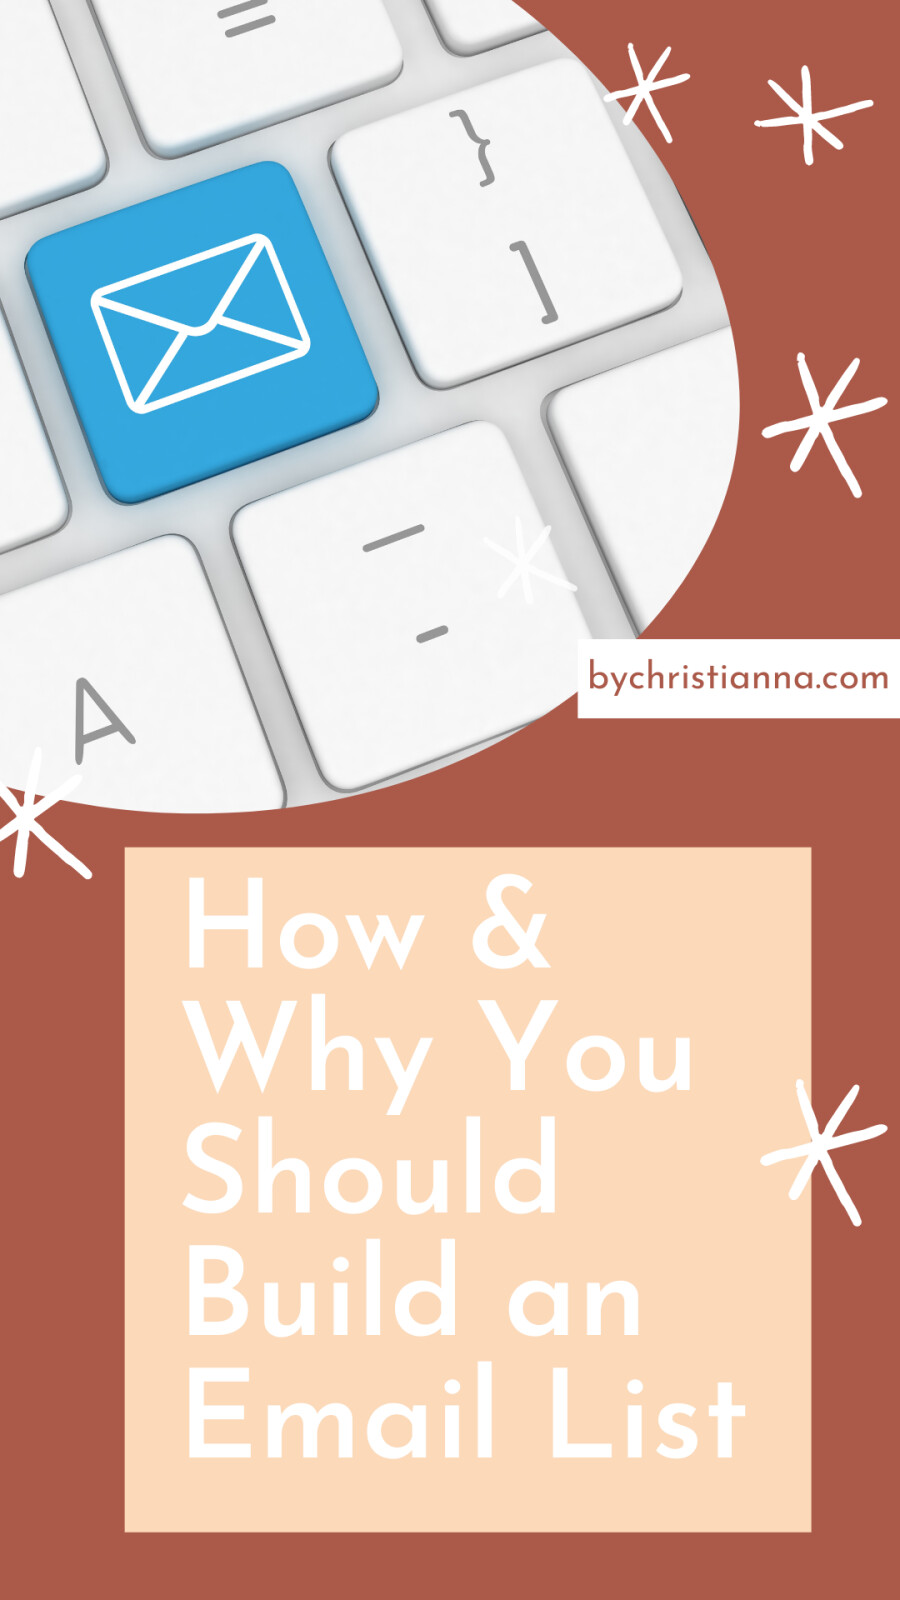 How and Why You Should Build an Email List